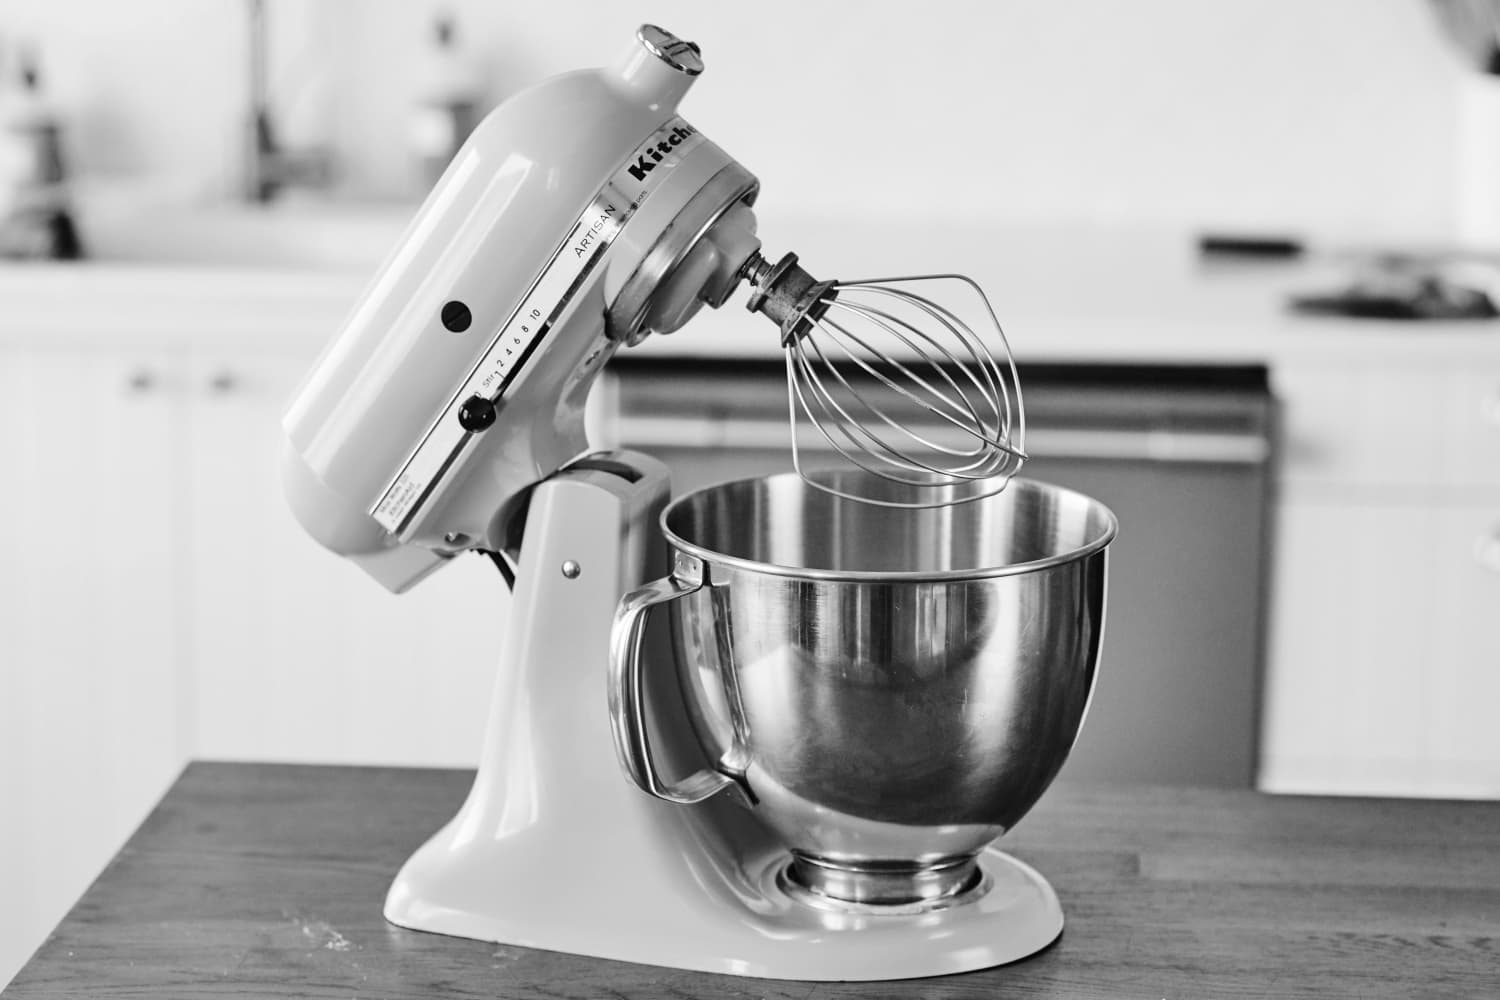 Walmart Released an Exclusive Line of KitchenAid Products